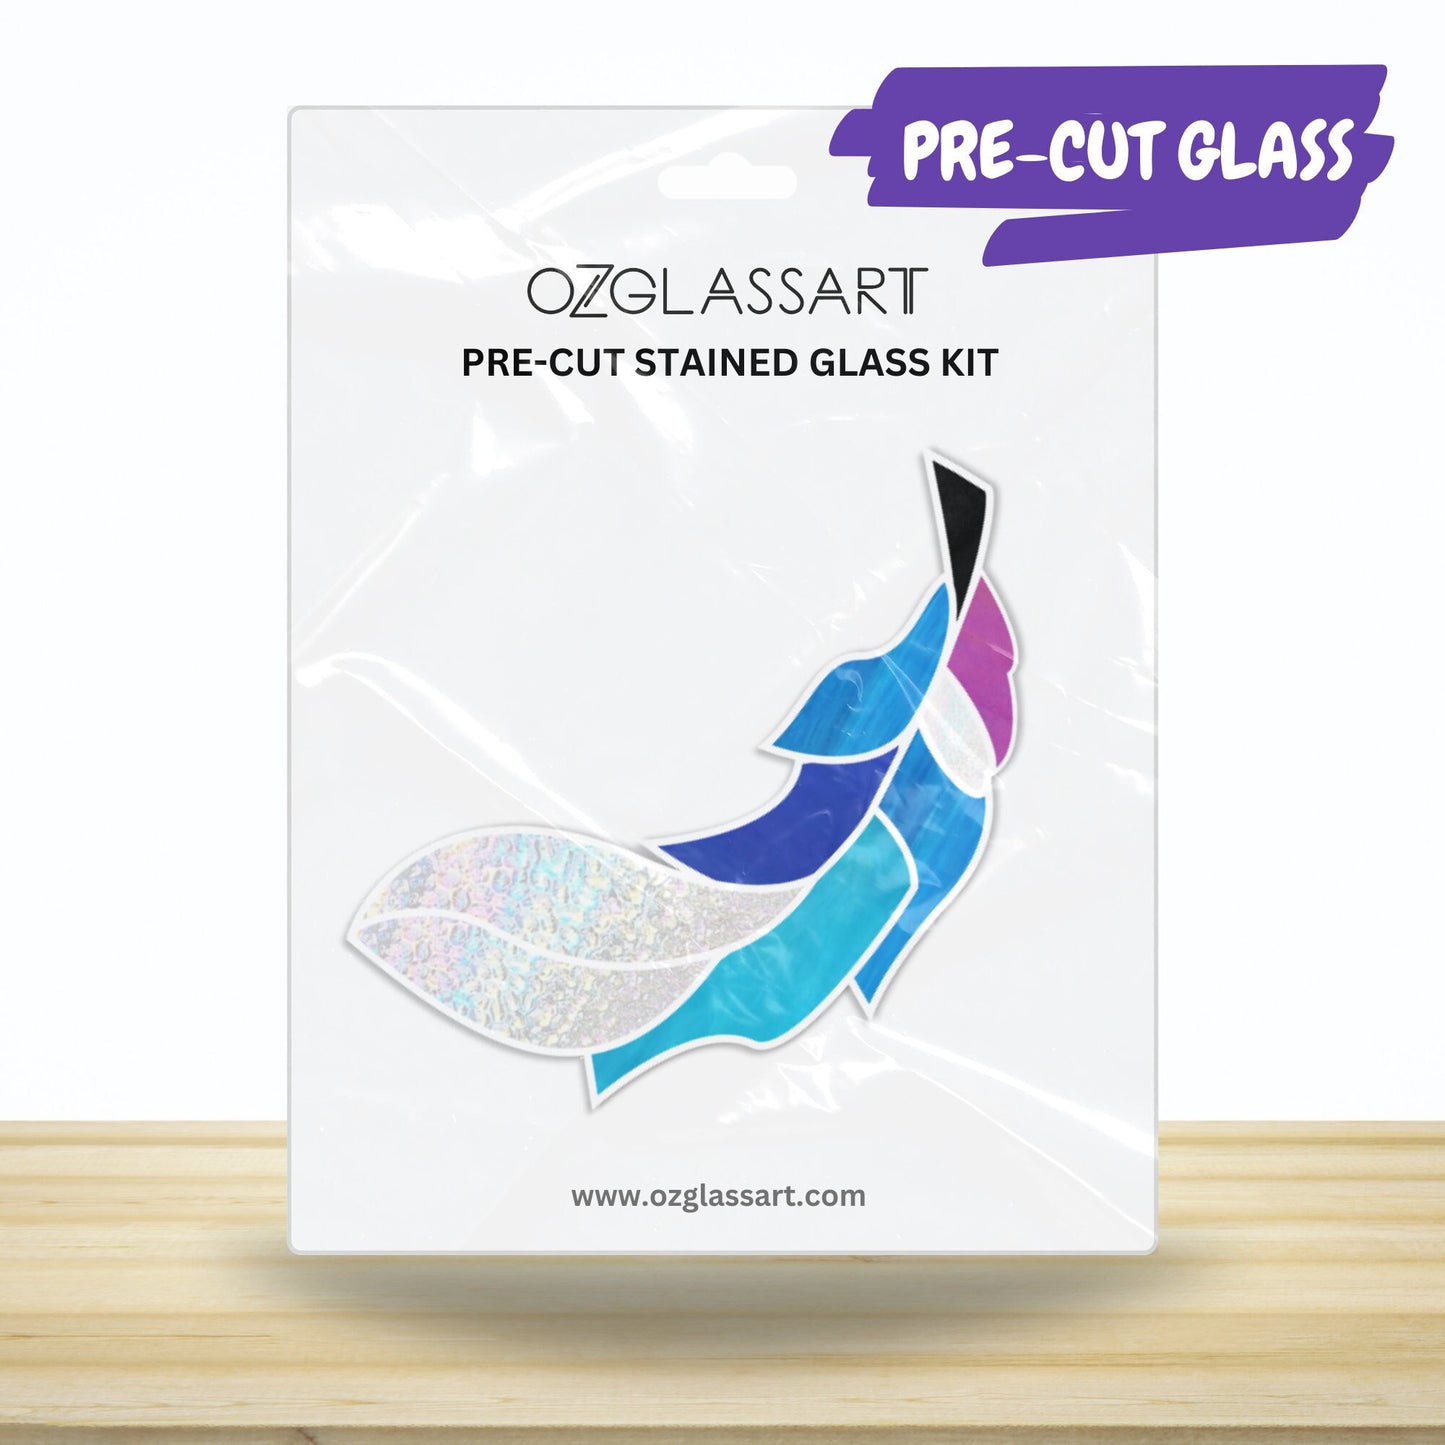 precut stained glass feather kit, feather pre-cut glass kit, diy glass kits.